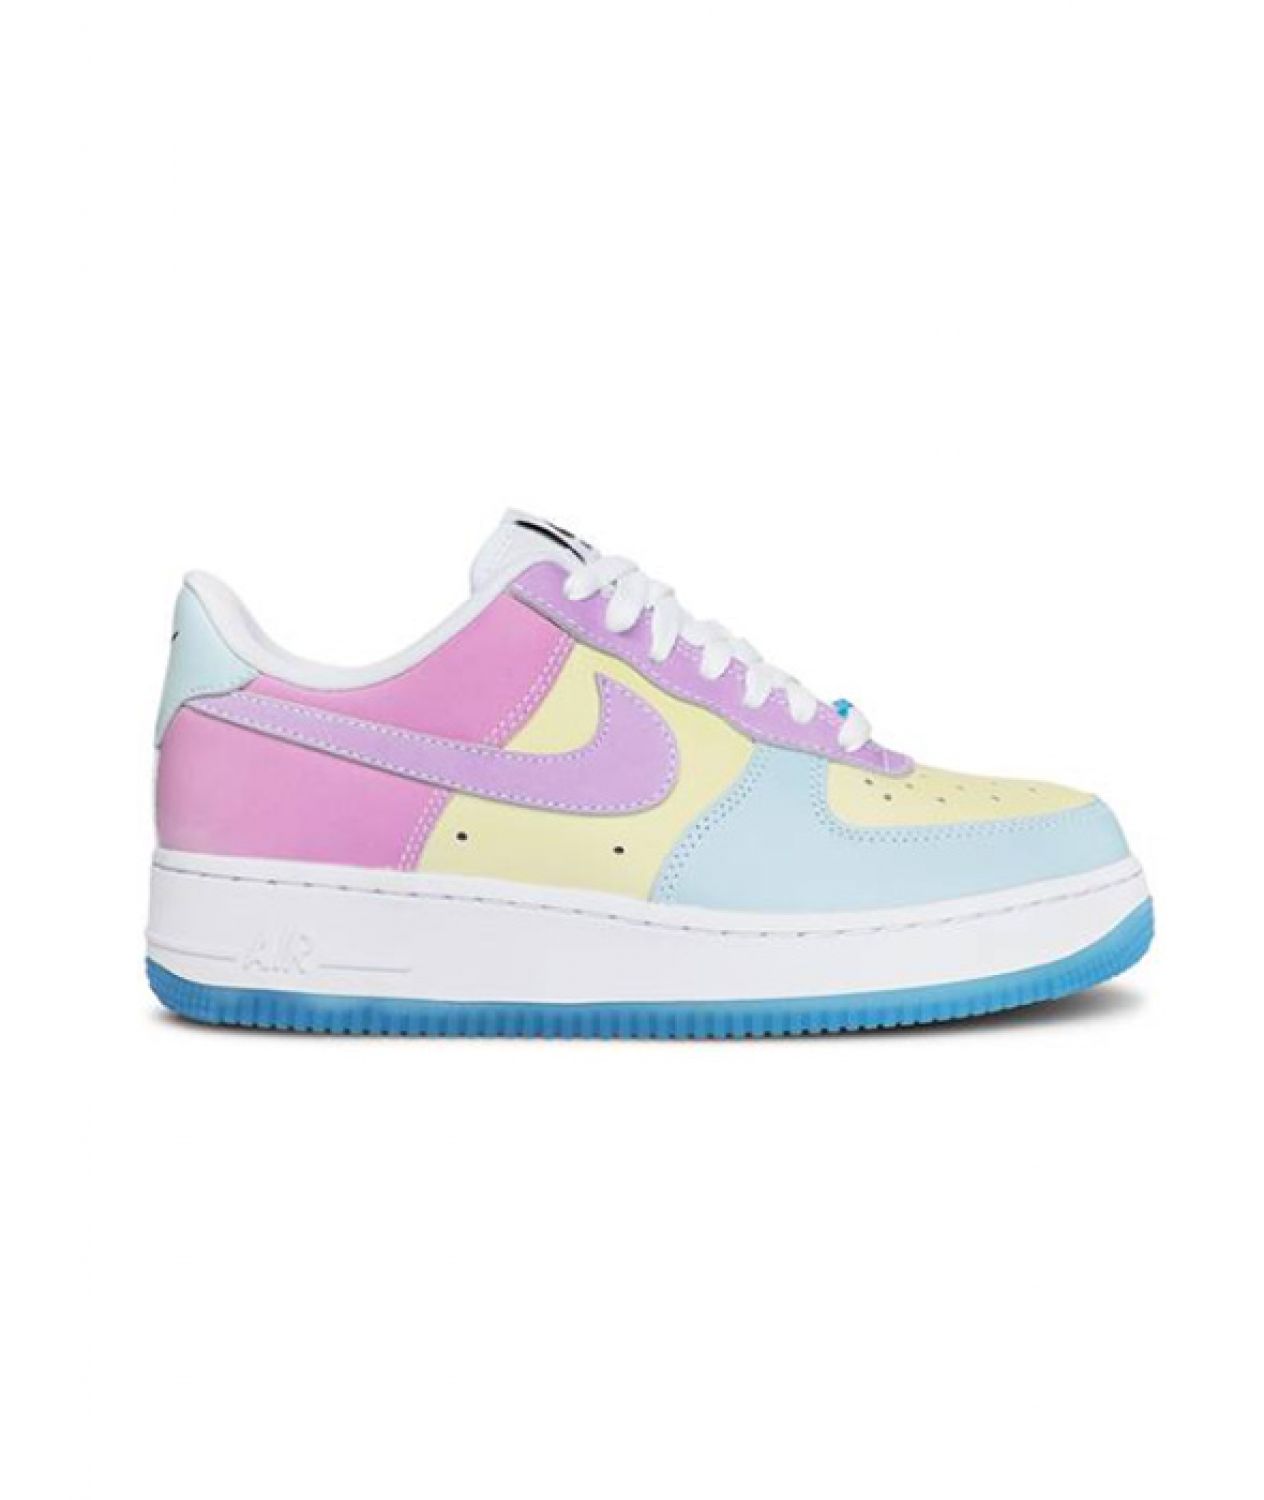 Nike Air Force 1 Low LX UV Reactive (W) Photochromic | Preorder ...